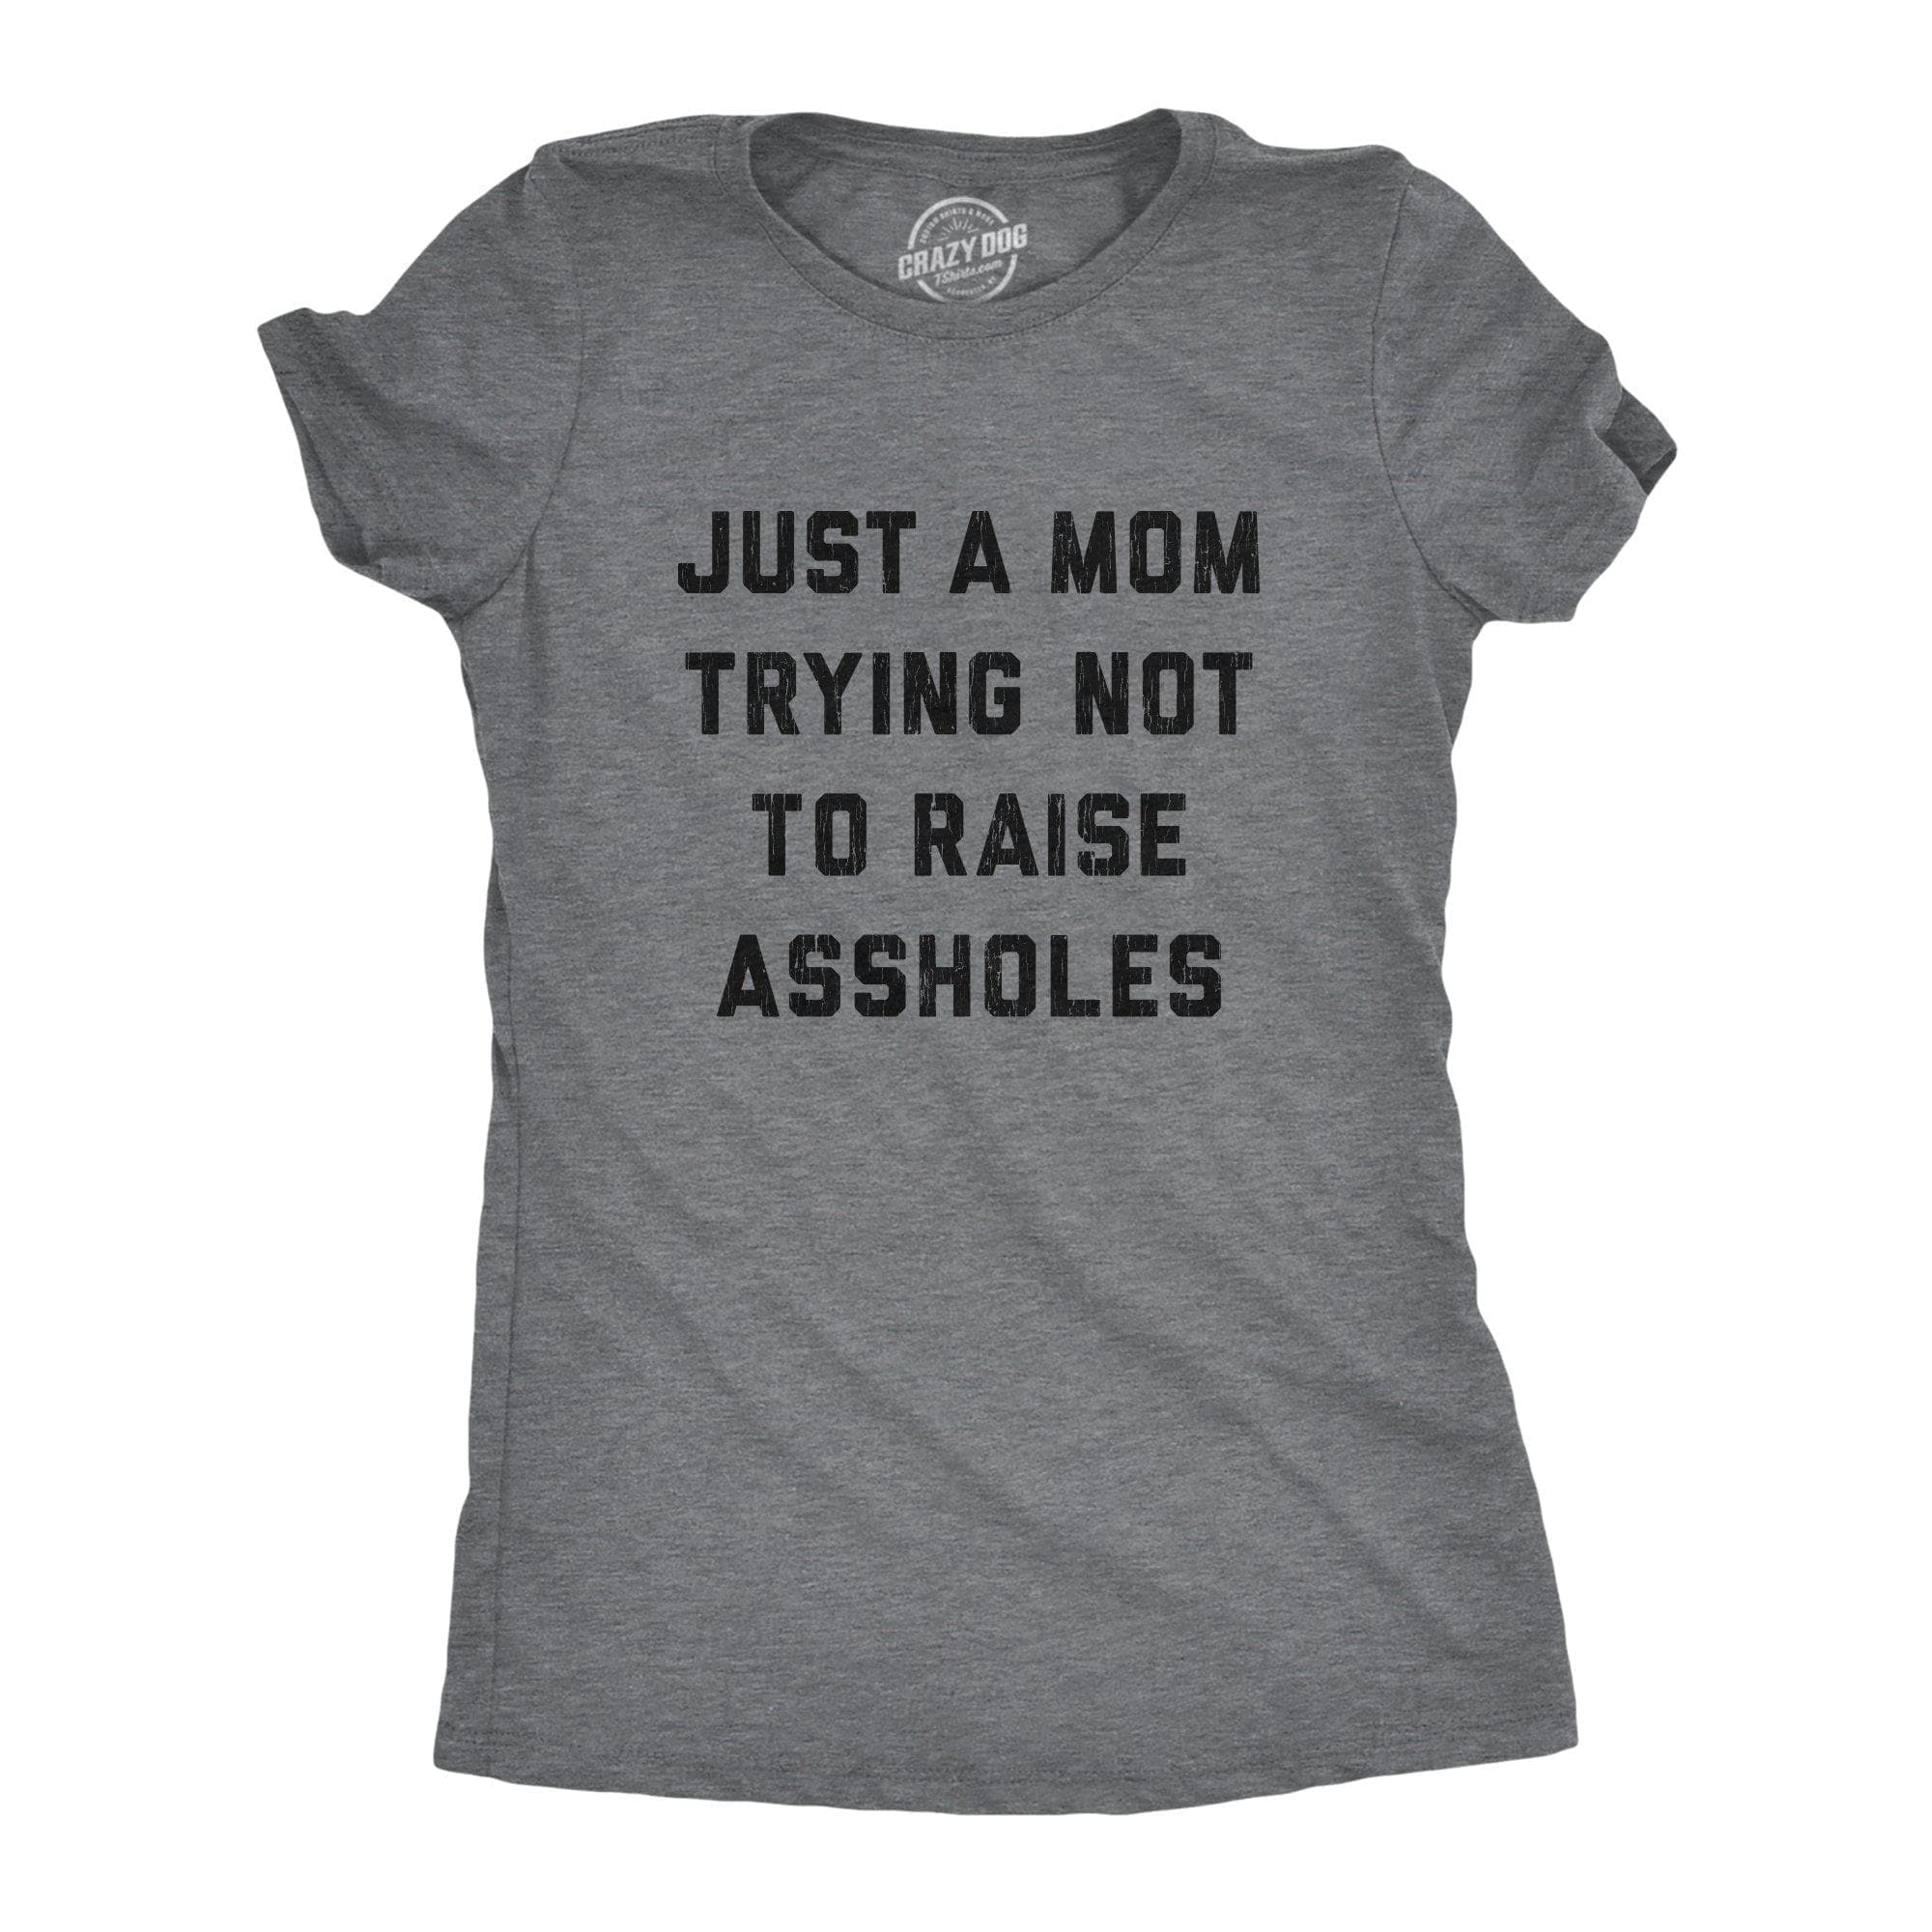 Just A Mom Trying Not To Raise Assholes Women's Tshirt - Crazy Dog T-Shirts